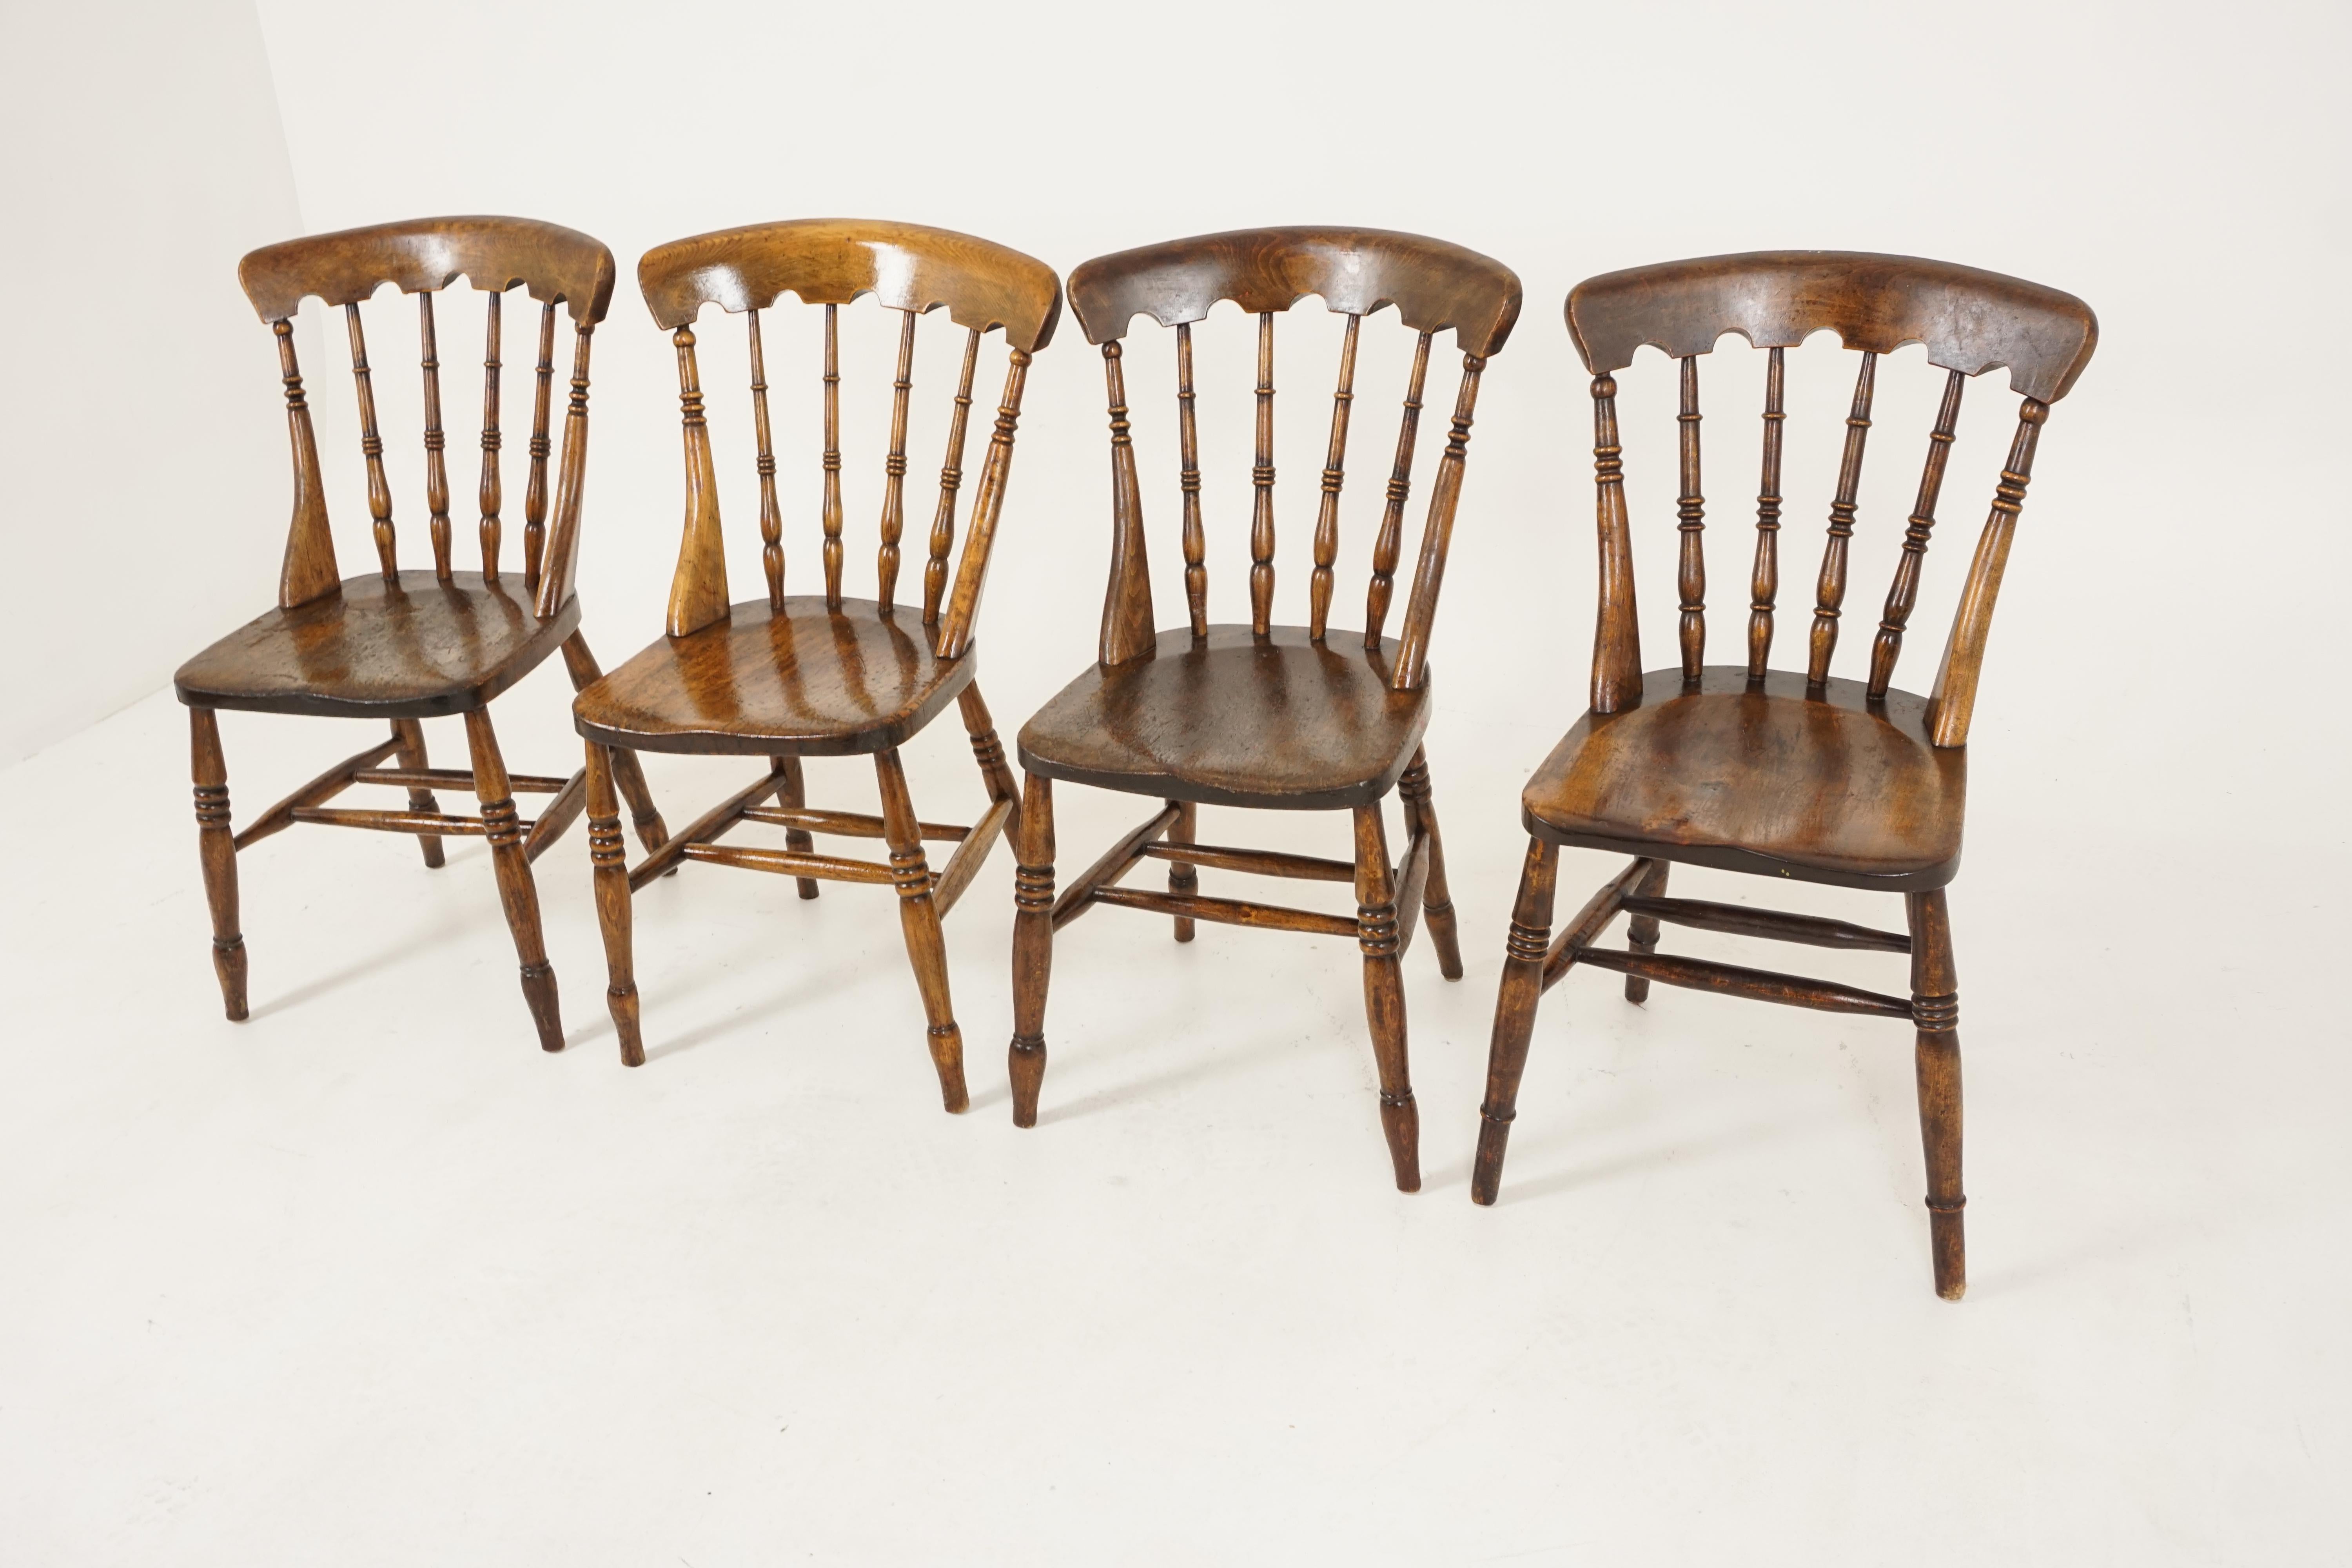 4 antique dining chairs, beechwood, spindle bar back, Farmhouse Kitchen Chairs, Scotland 1880, B2524

Scotland 1880
Solid beechwood
Original finish
Shaped top rail
Four turned spindles
Pair of turned supports on the end
Solid wooden